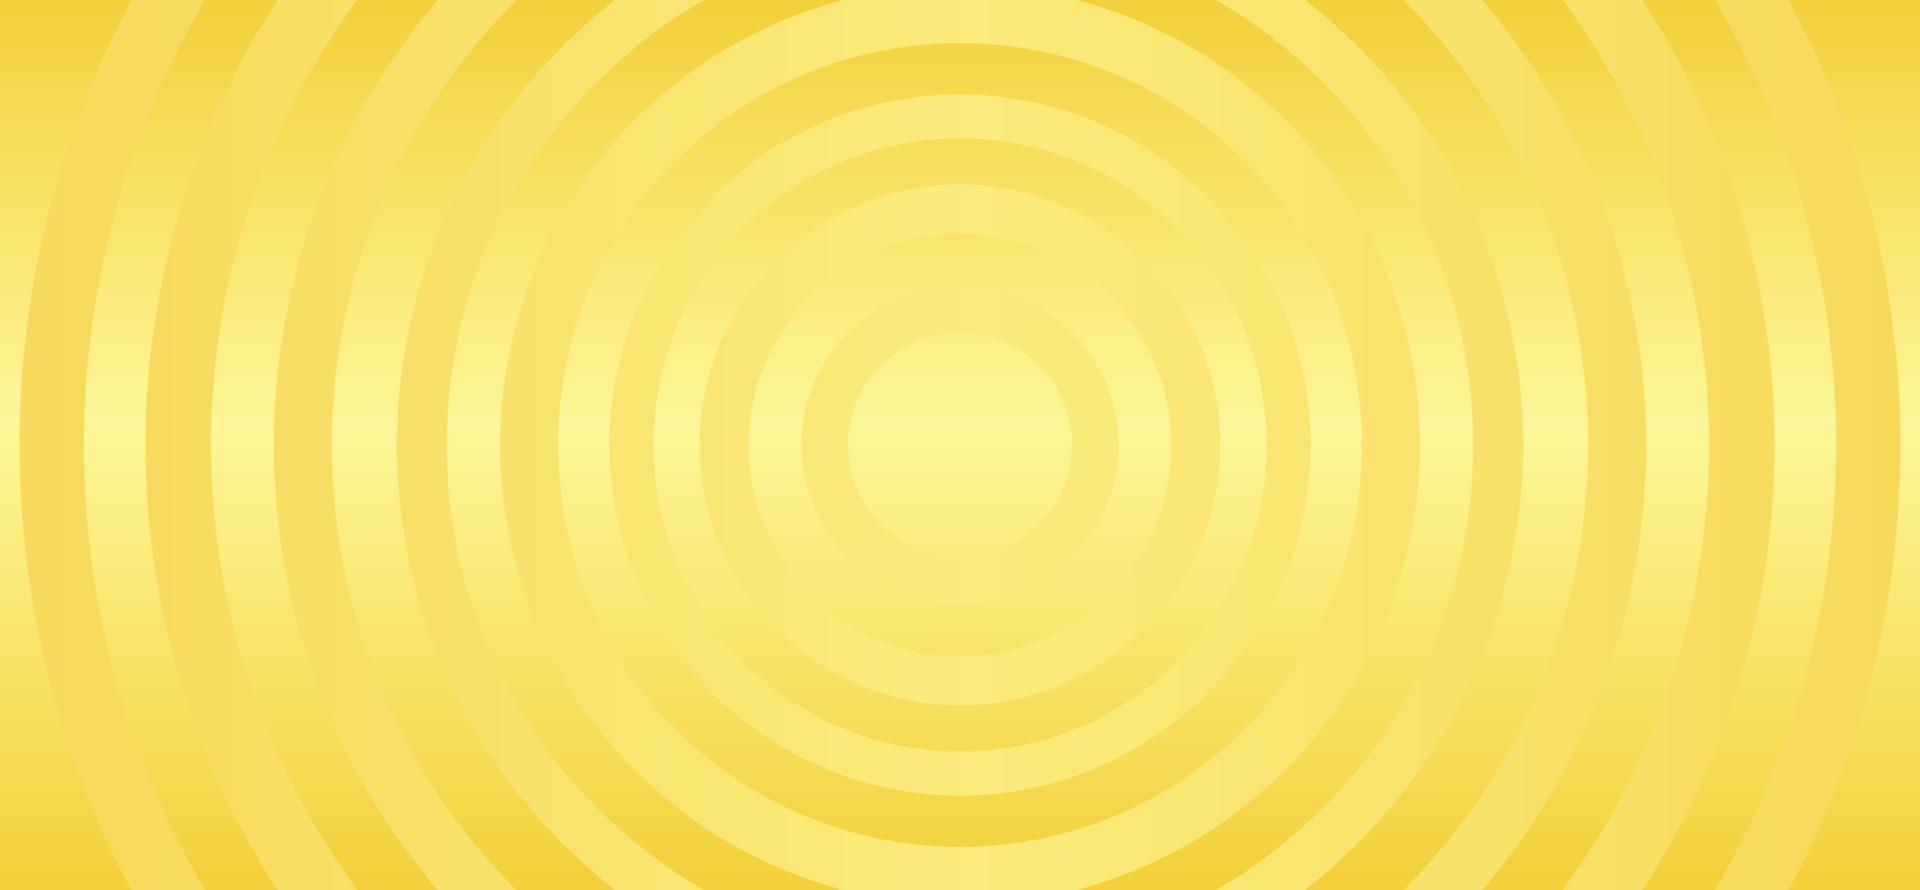 abstract circle background vector